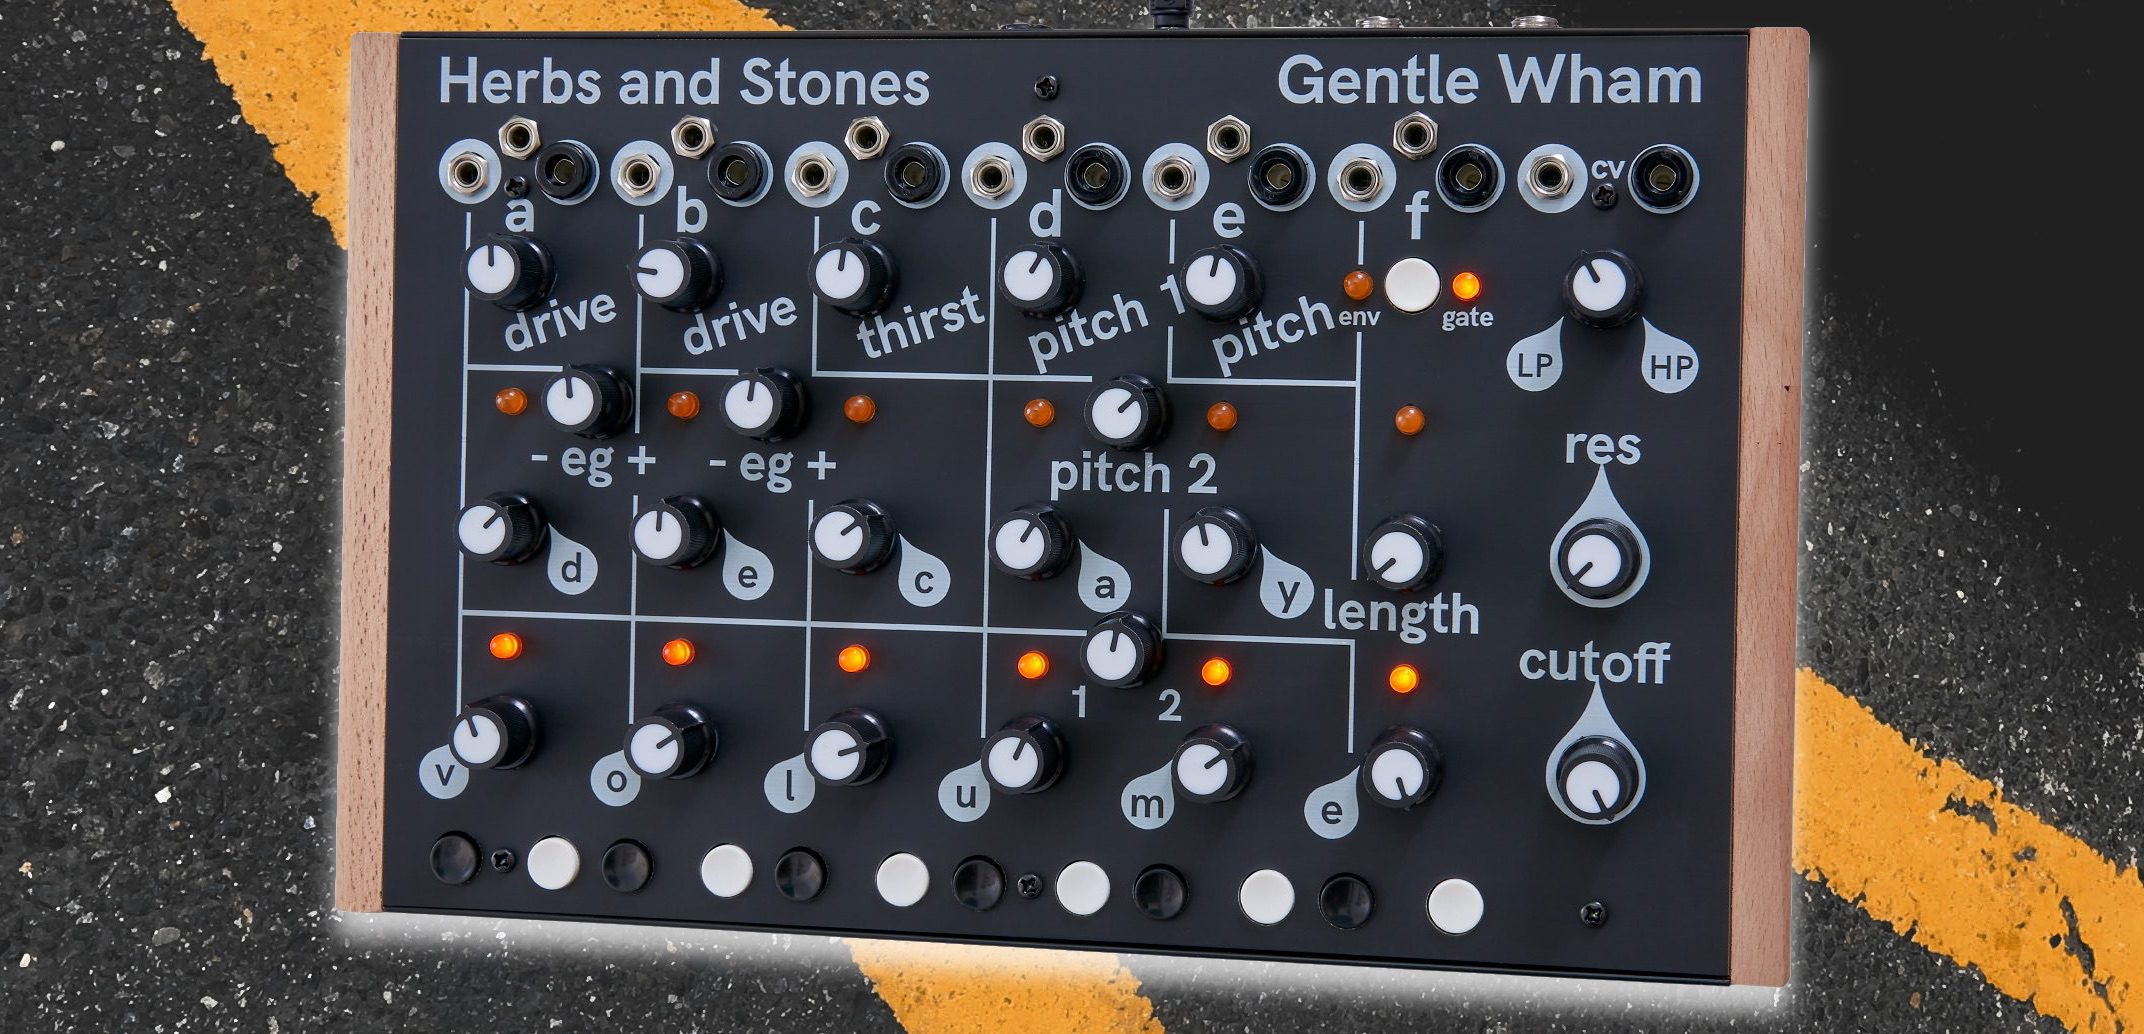 Test: Herbs and Stones Gentle Wham, Drum-Synthesizer 